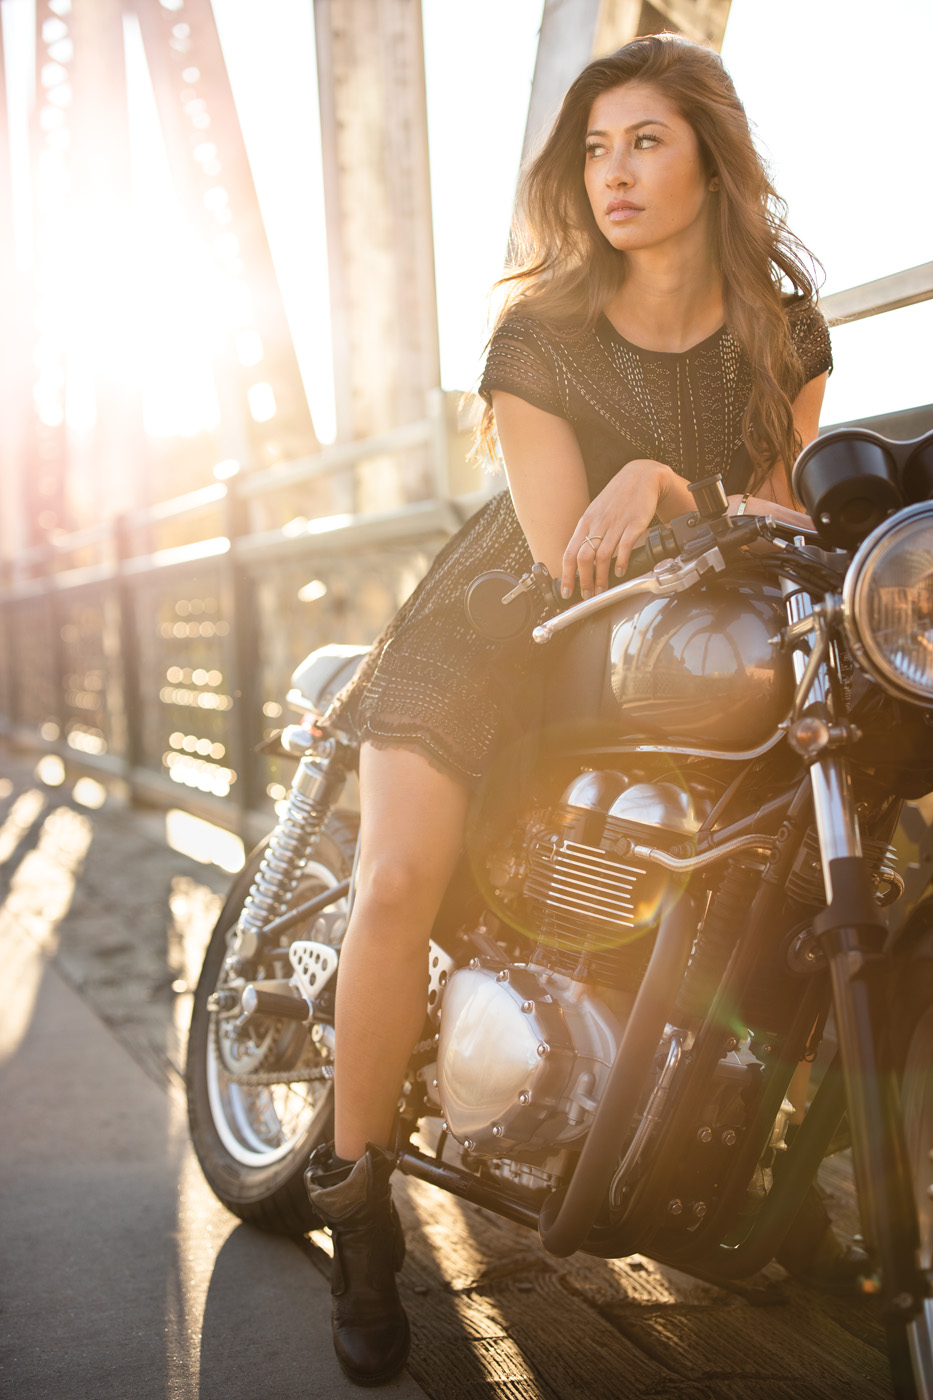 Woman sits on motorcycle, leaning forward and looking off-camera with bright light in background.